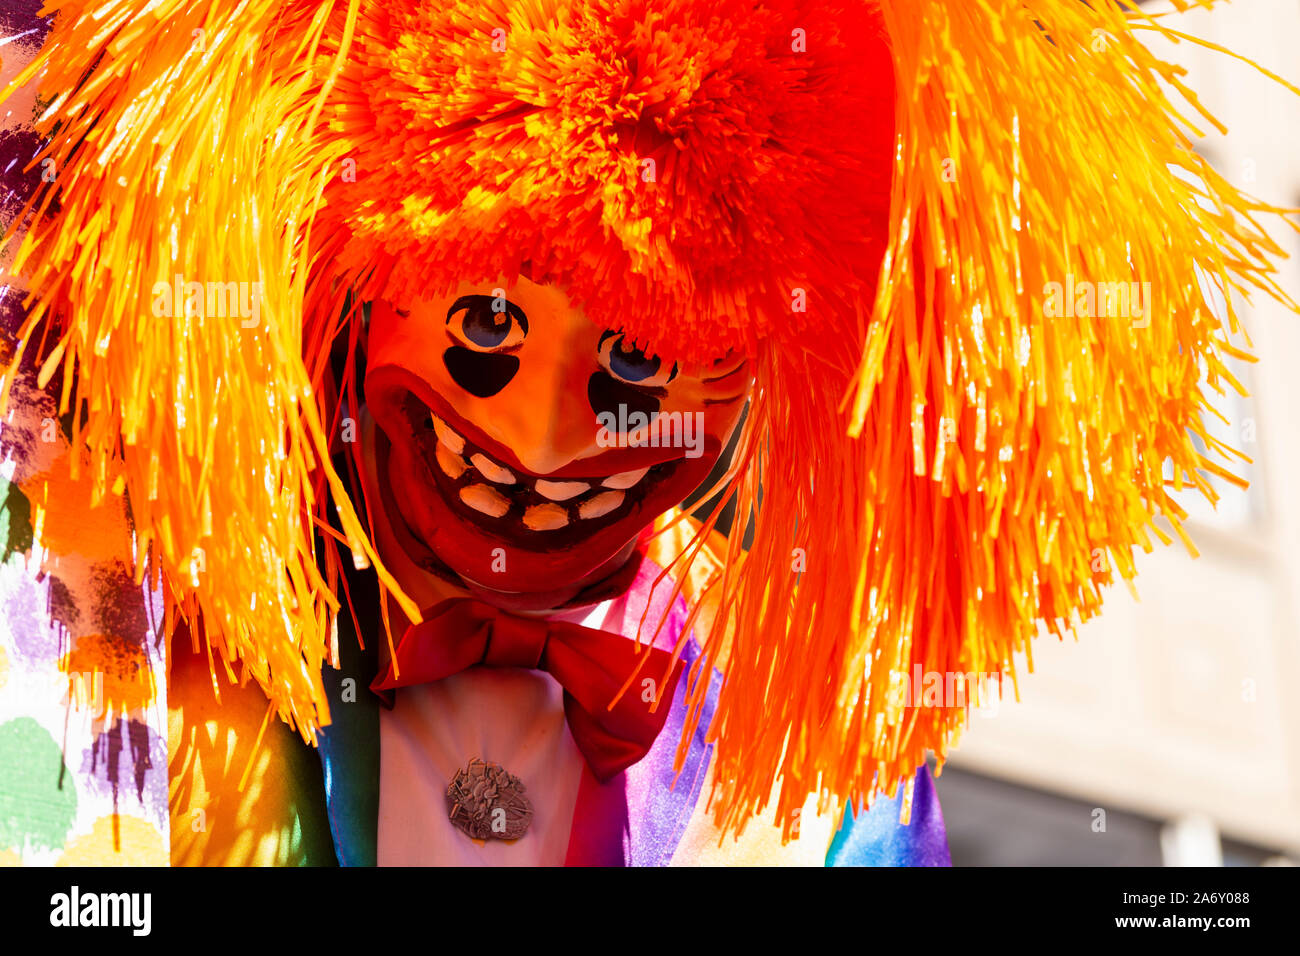 Marktplatz, Basel, Switzerland - March 13th, 2019. Close-up of a carnival participant in a colorful costume with orange hair Stock Photo